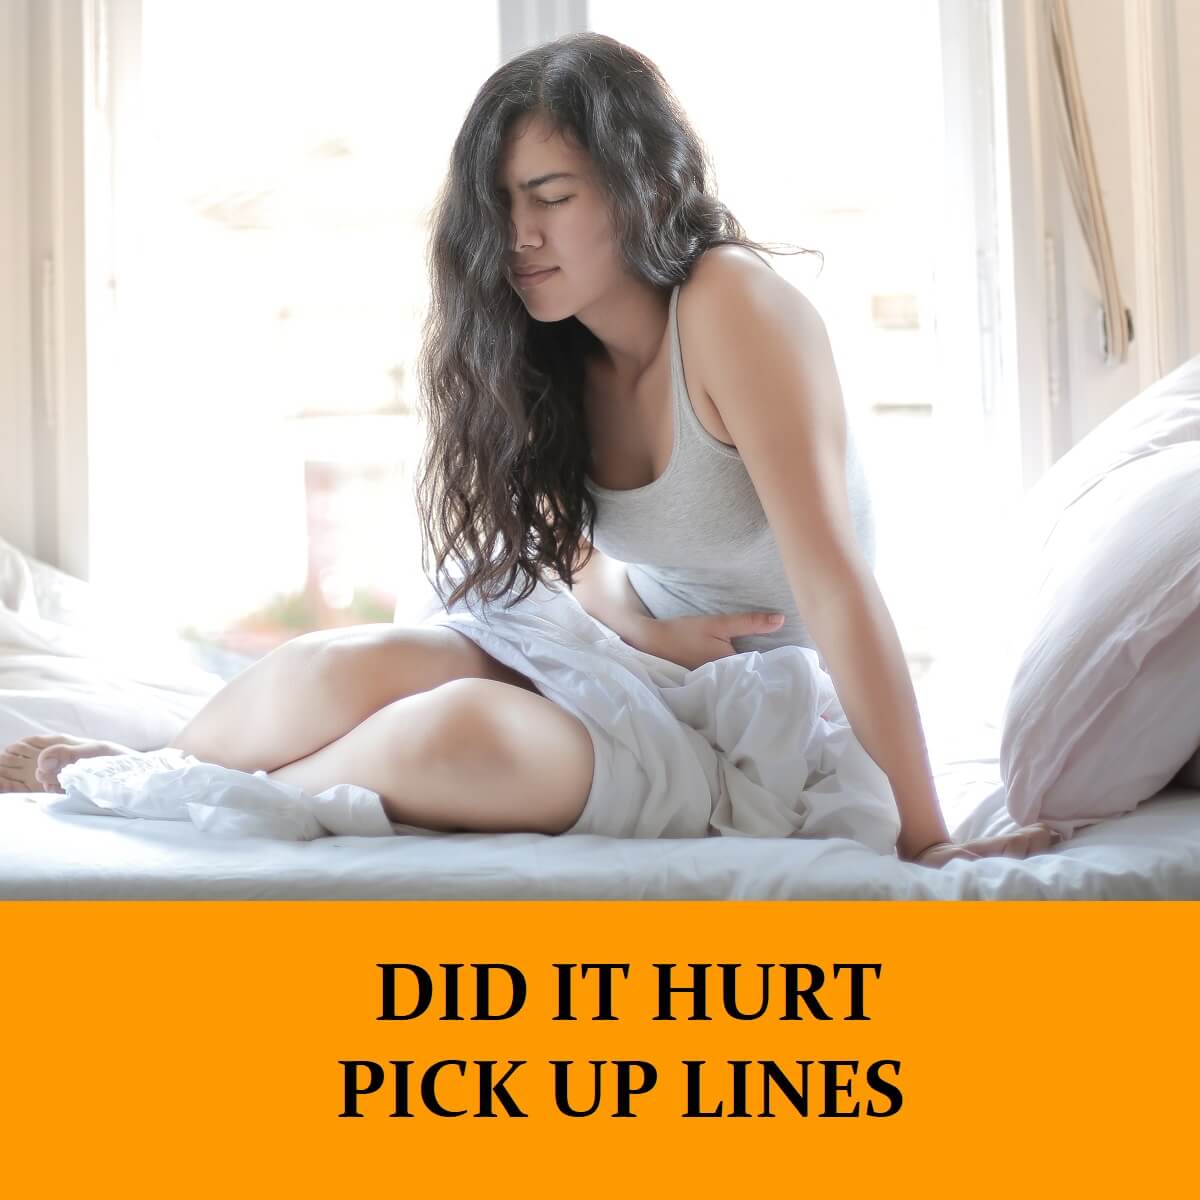 Pick Up Lines About Did It Hurt